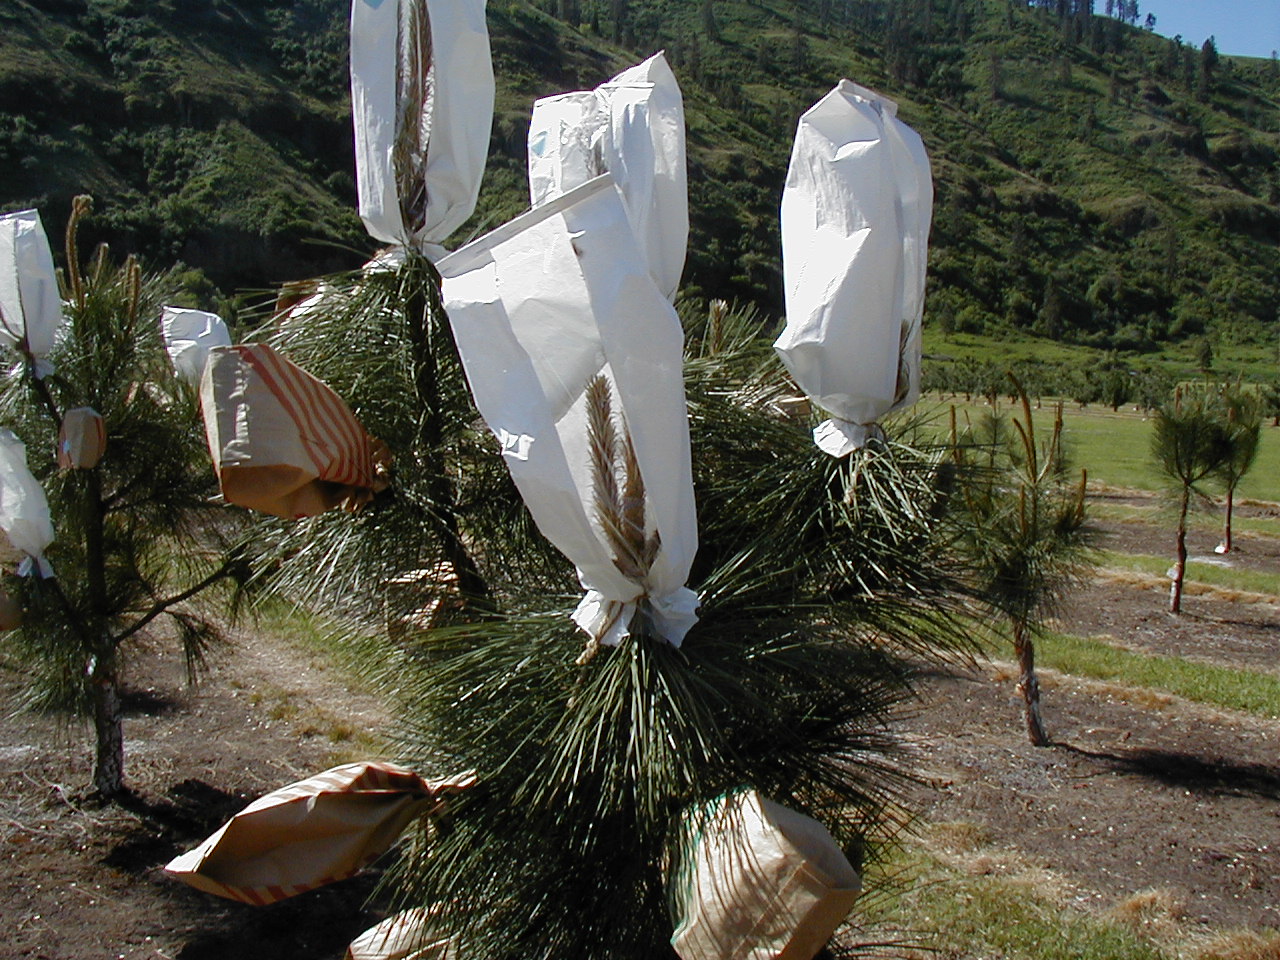 Pollination bags are used to exclude unwanted pollen in an IETIC member seed orchard